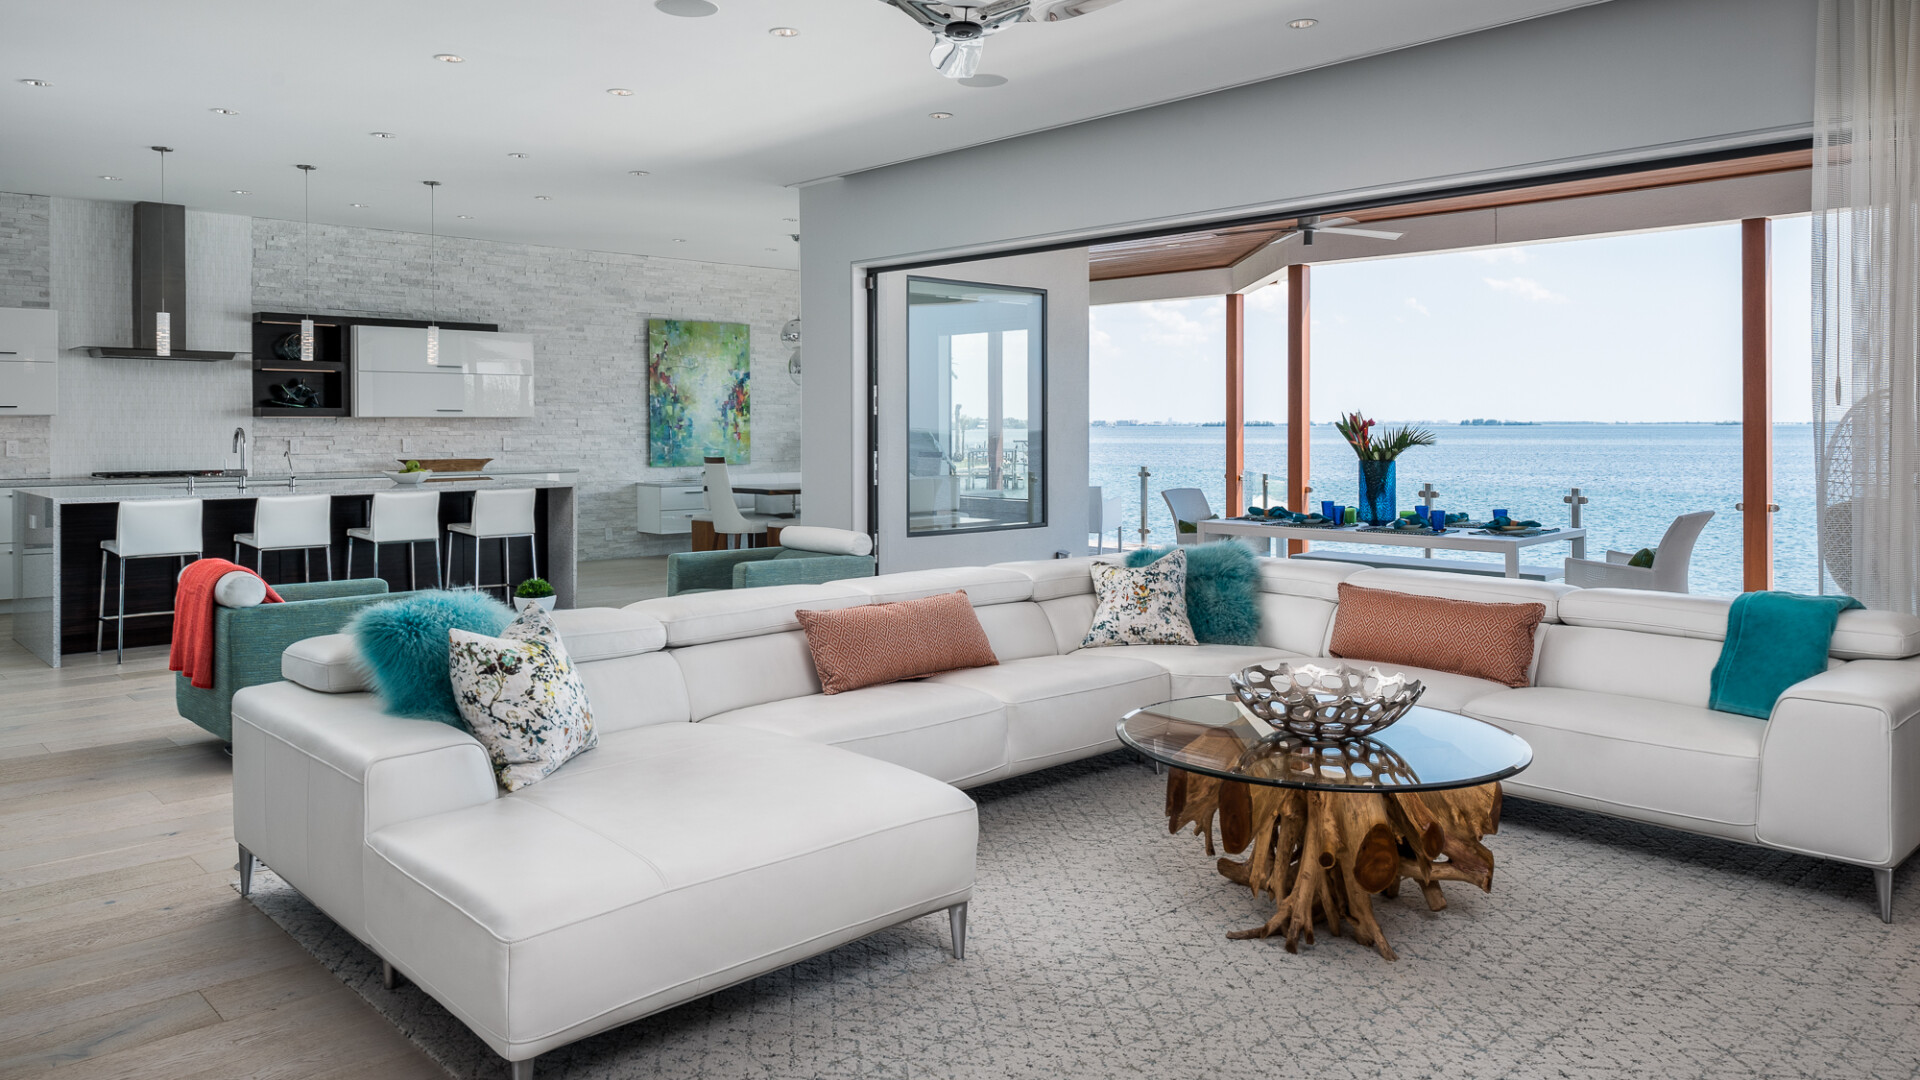 Modern waterfront home boasting an open floor plan and seamless indoor-outdoor living, Tampa Bay FL